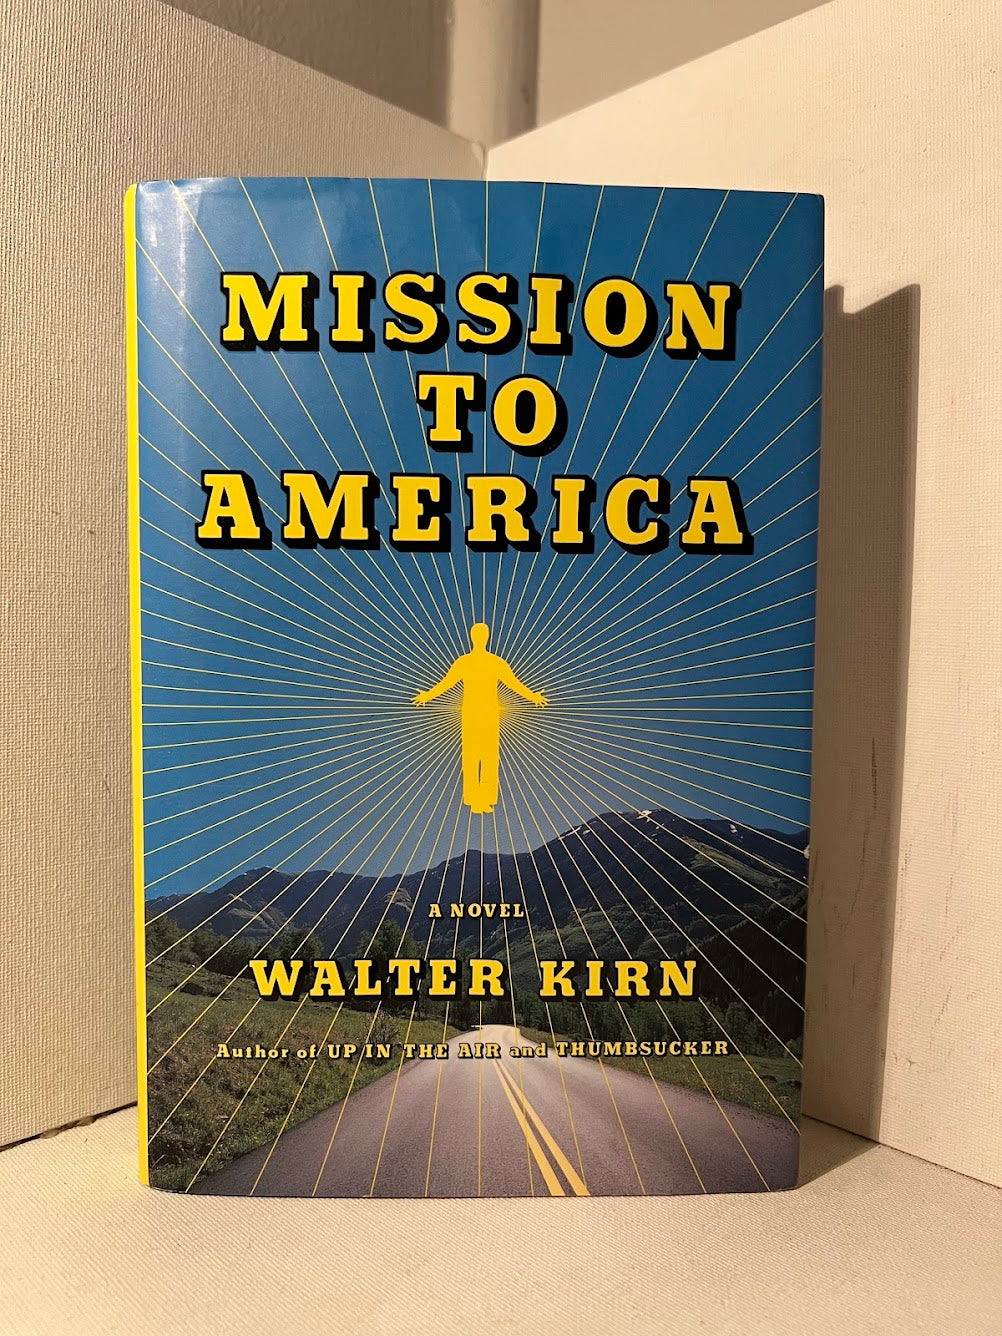 Mission to America by Walter Kirn